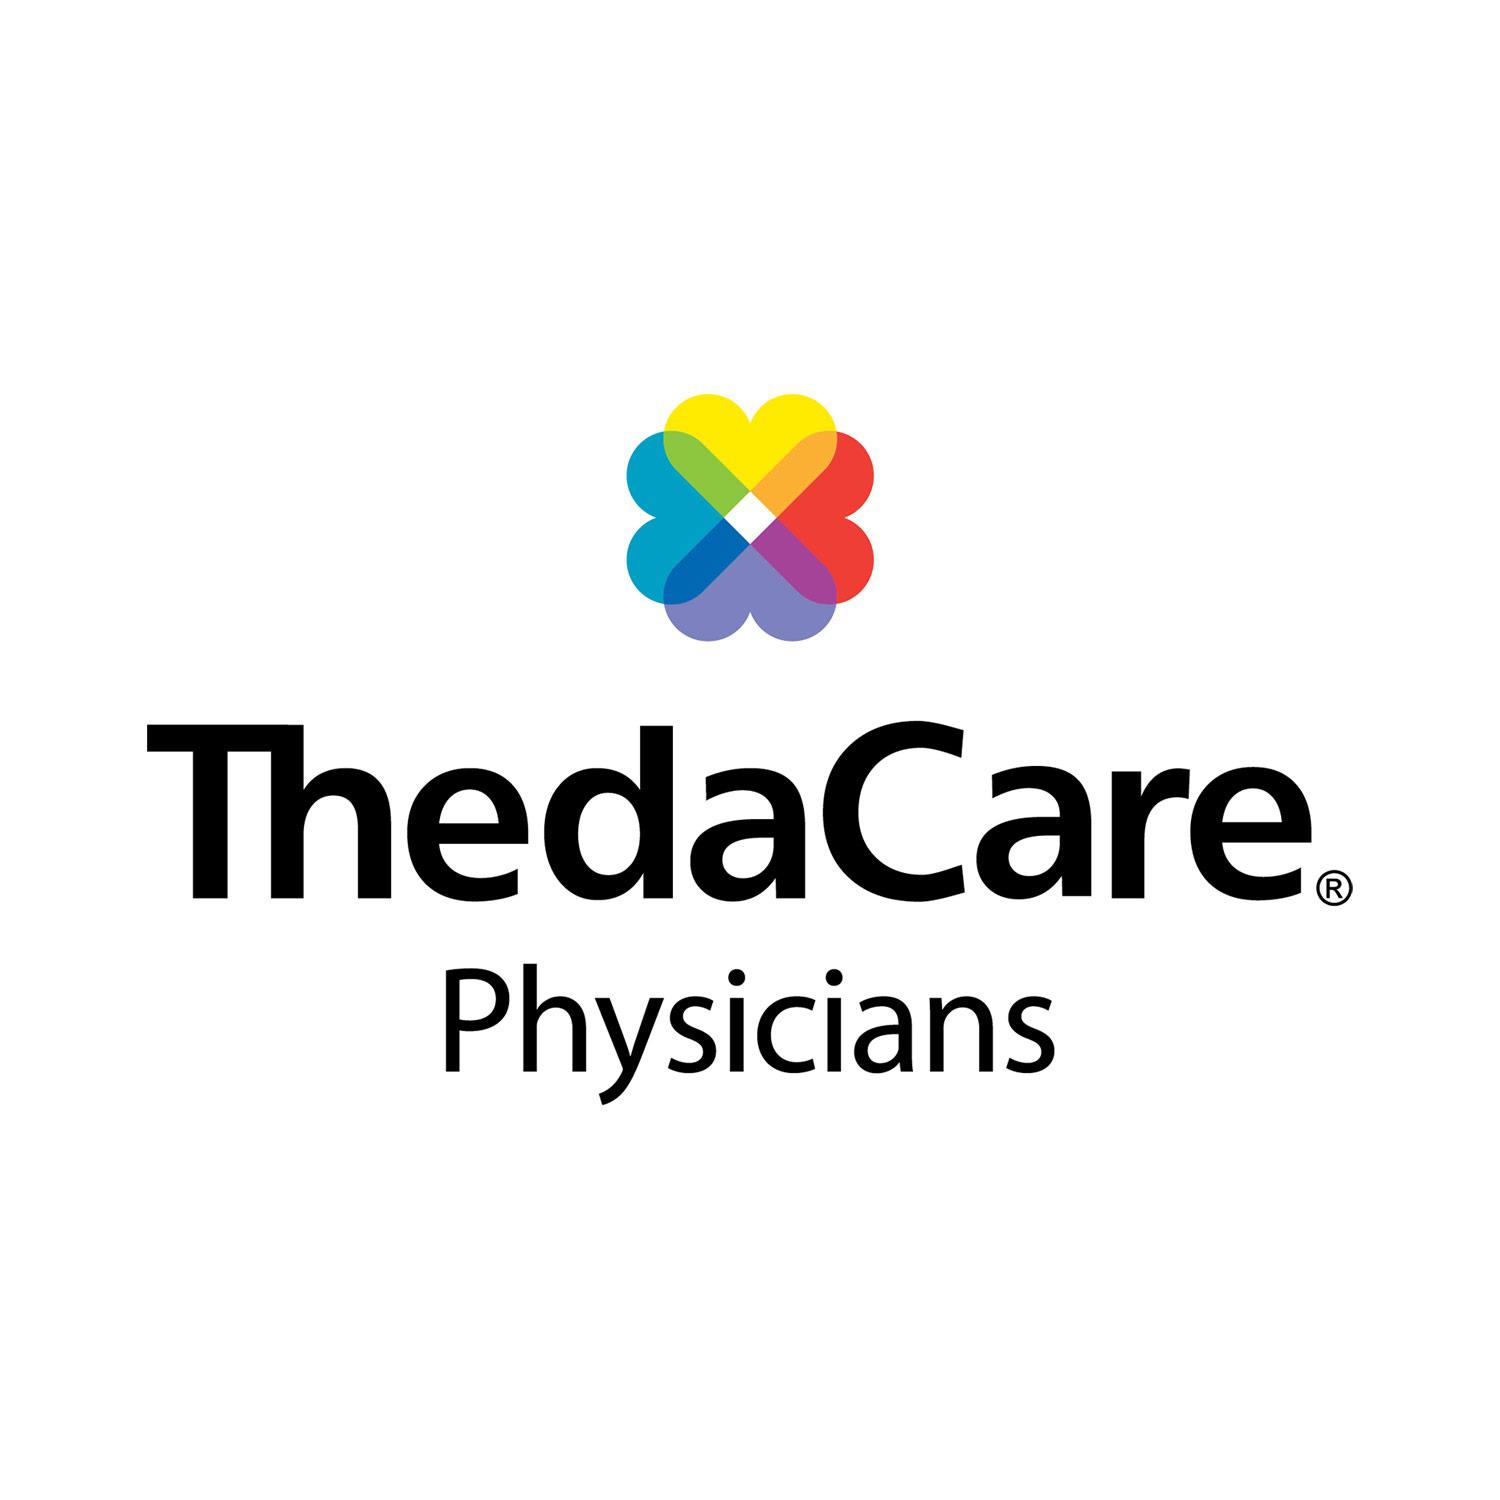 ThedaCare Physicians-Neenah - Neenah, WI 54956 - (920)729-6088 | ShowMeLocal.com